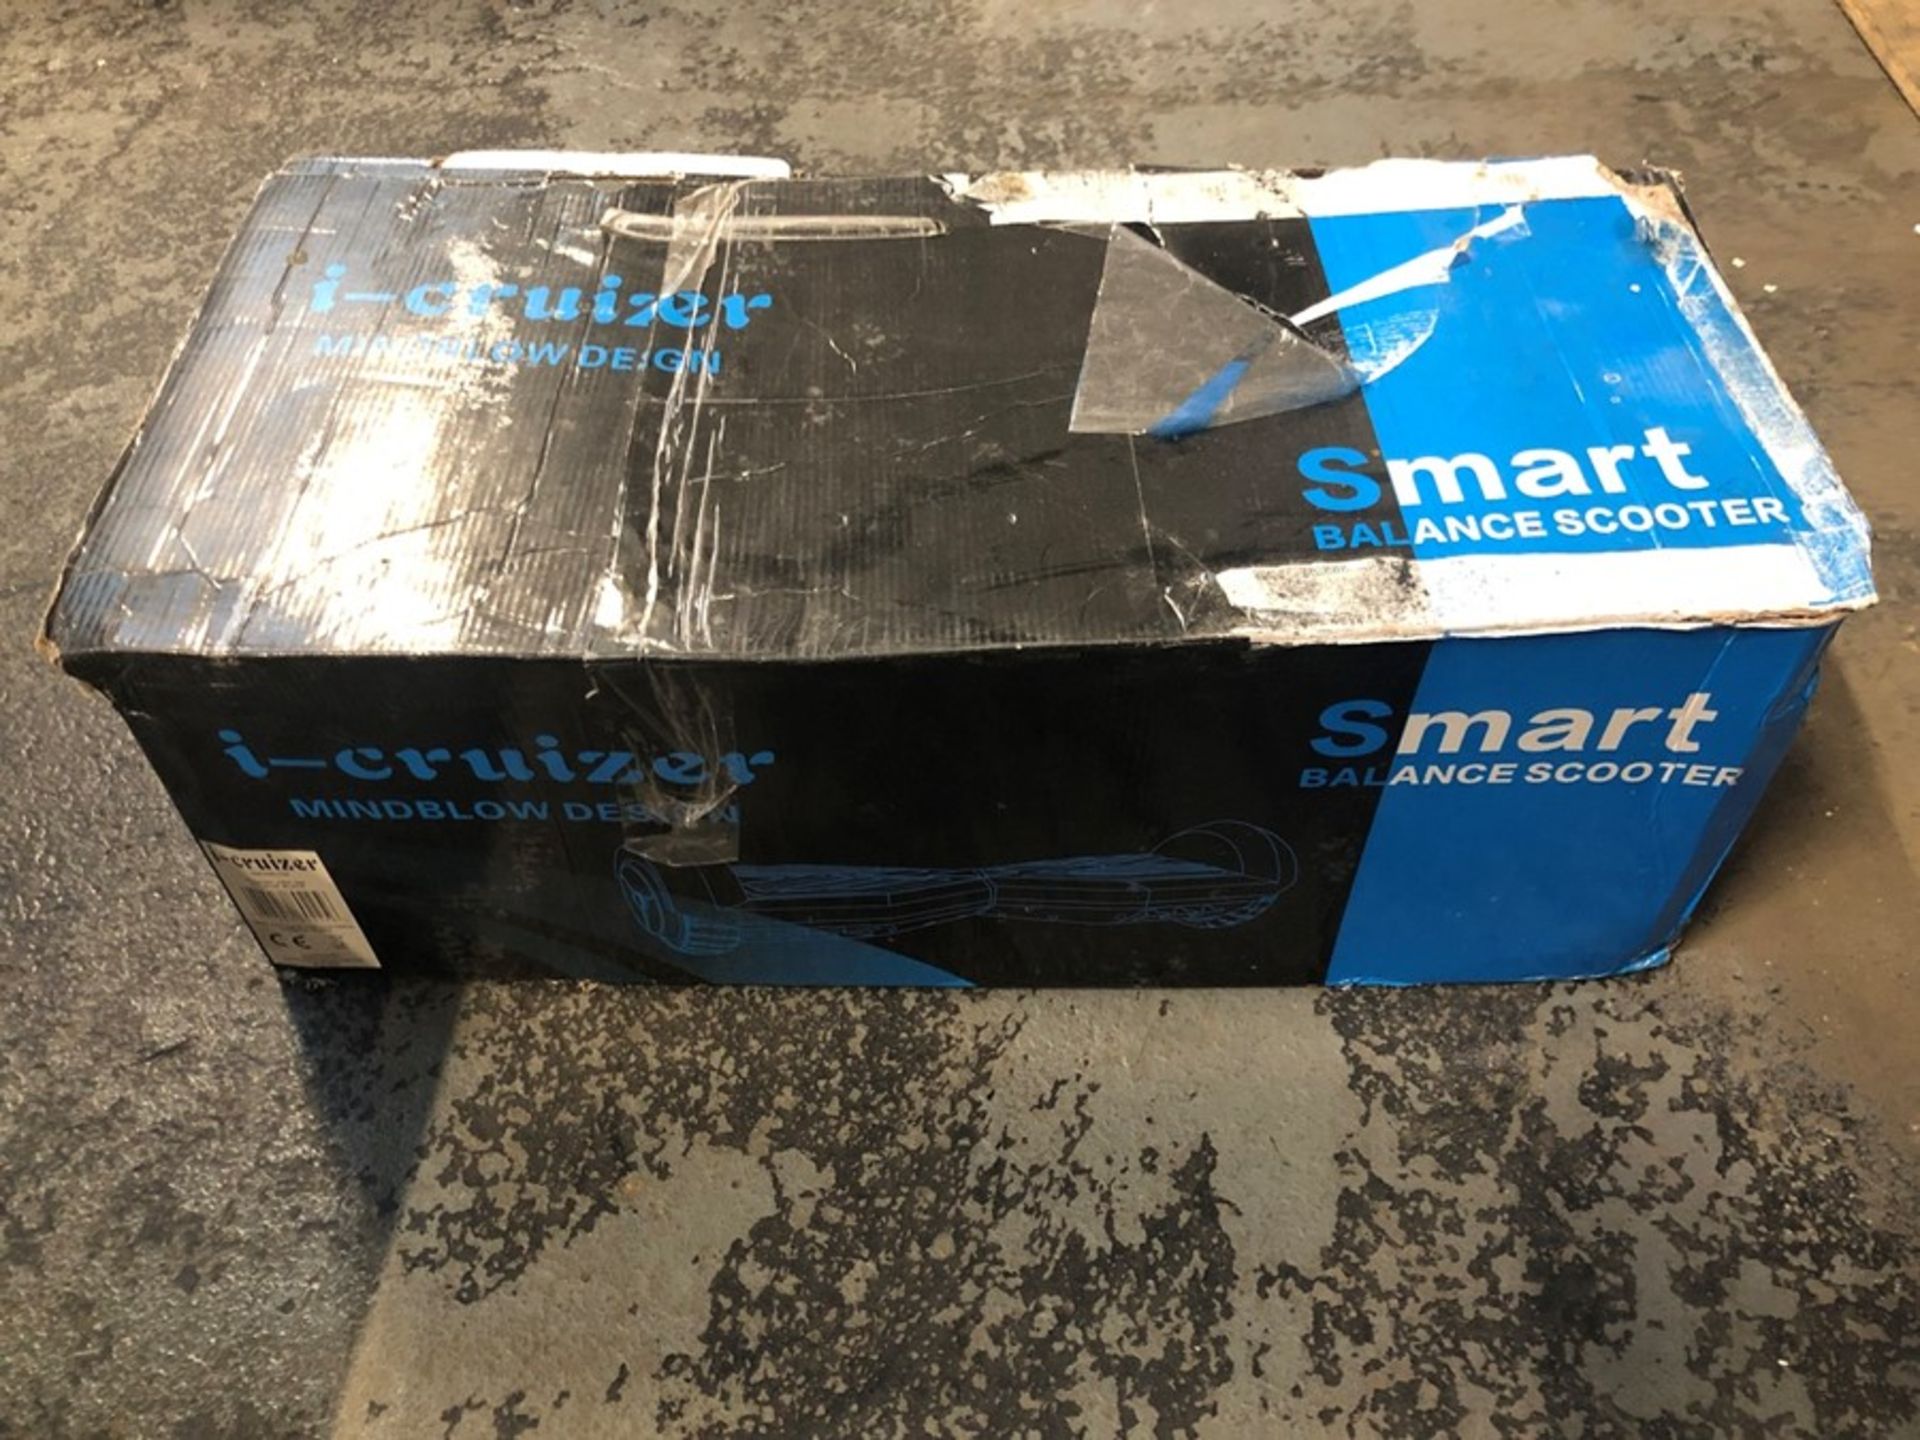 1 BOXED UNTESTED I CRUIZER MINDBLOW DESIGN SMART BALANCE SCOOTER / RRP £259.99 (PUBLIC VIEWING